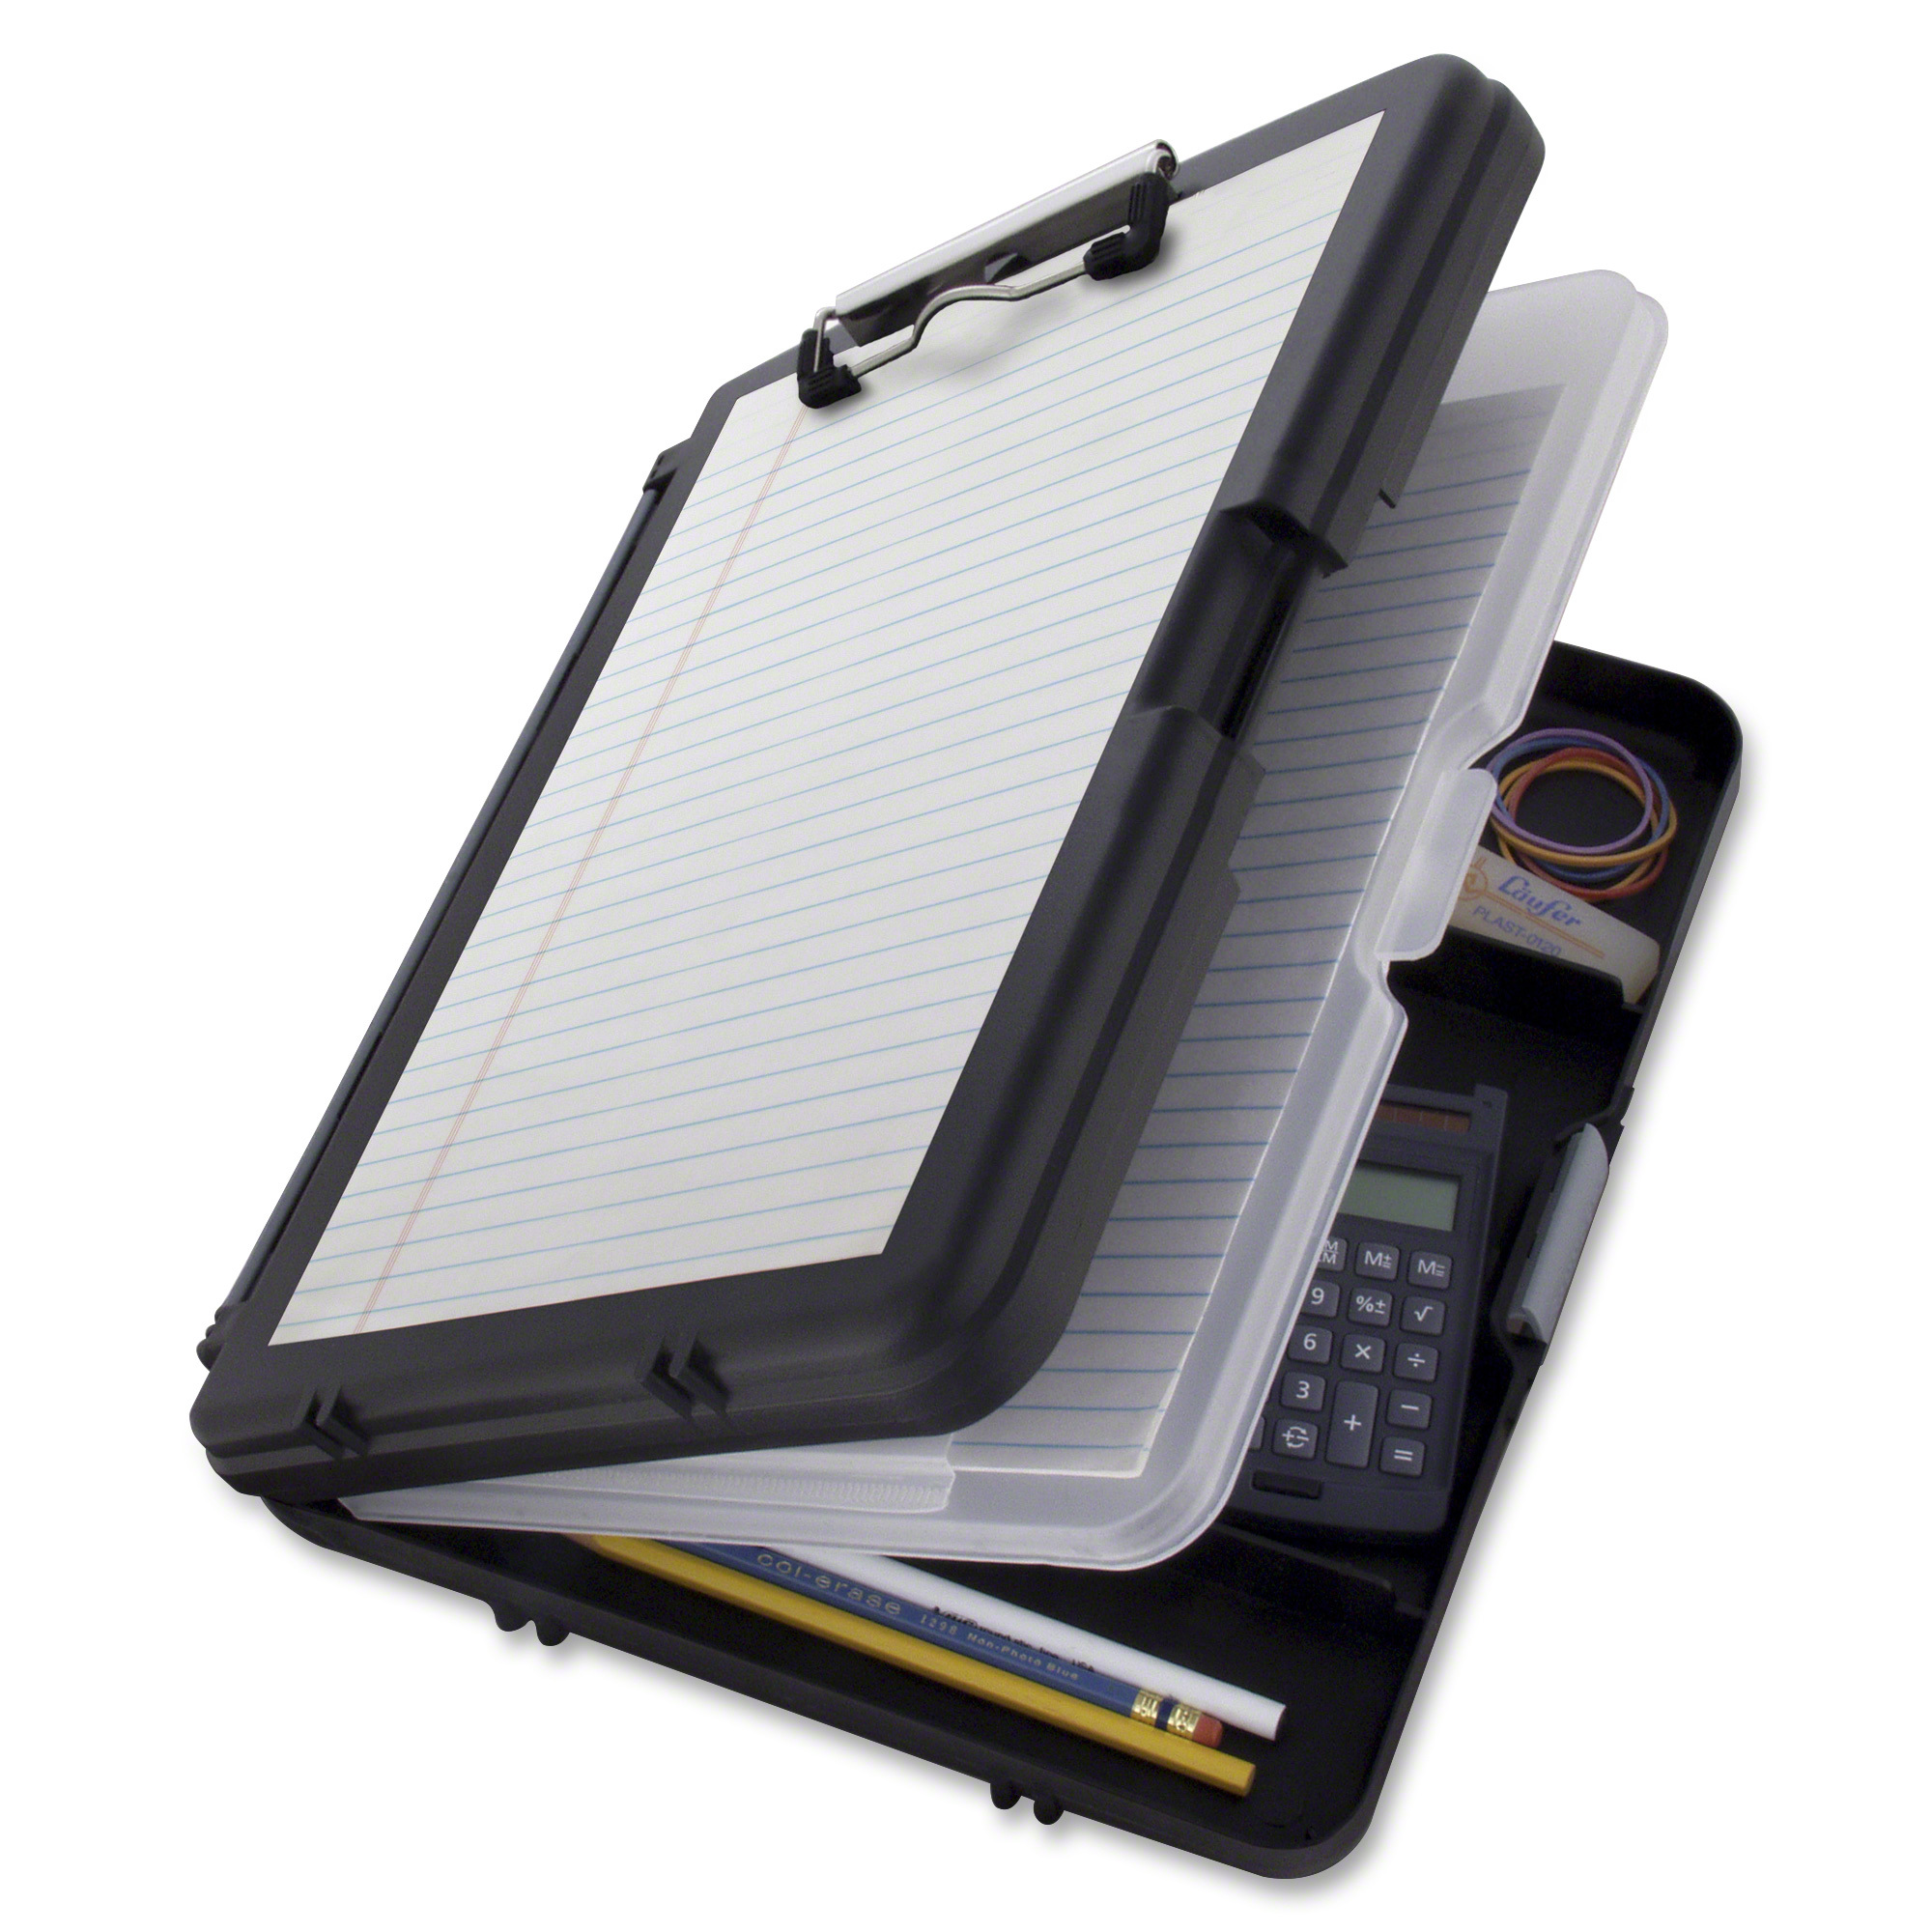 Saunders Tuff Writer Recycled Aluminum Clipboard - 1 Clip Capacity - Side  Opening - 12 - Aluminum - Silver - 1 Each - Filo CleanTech